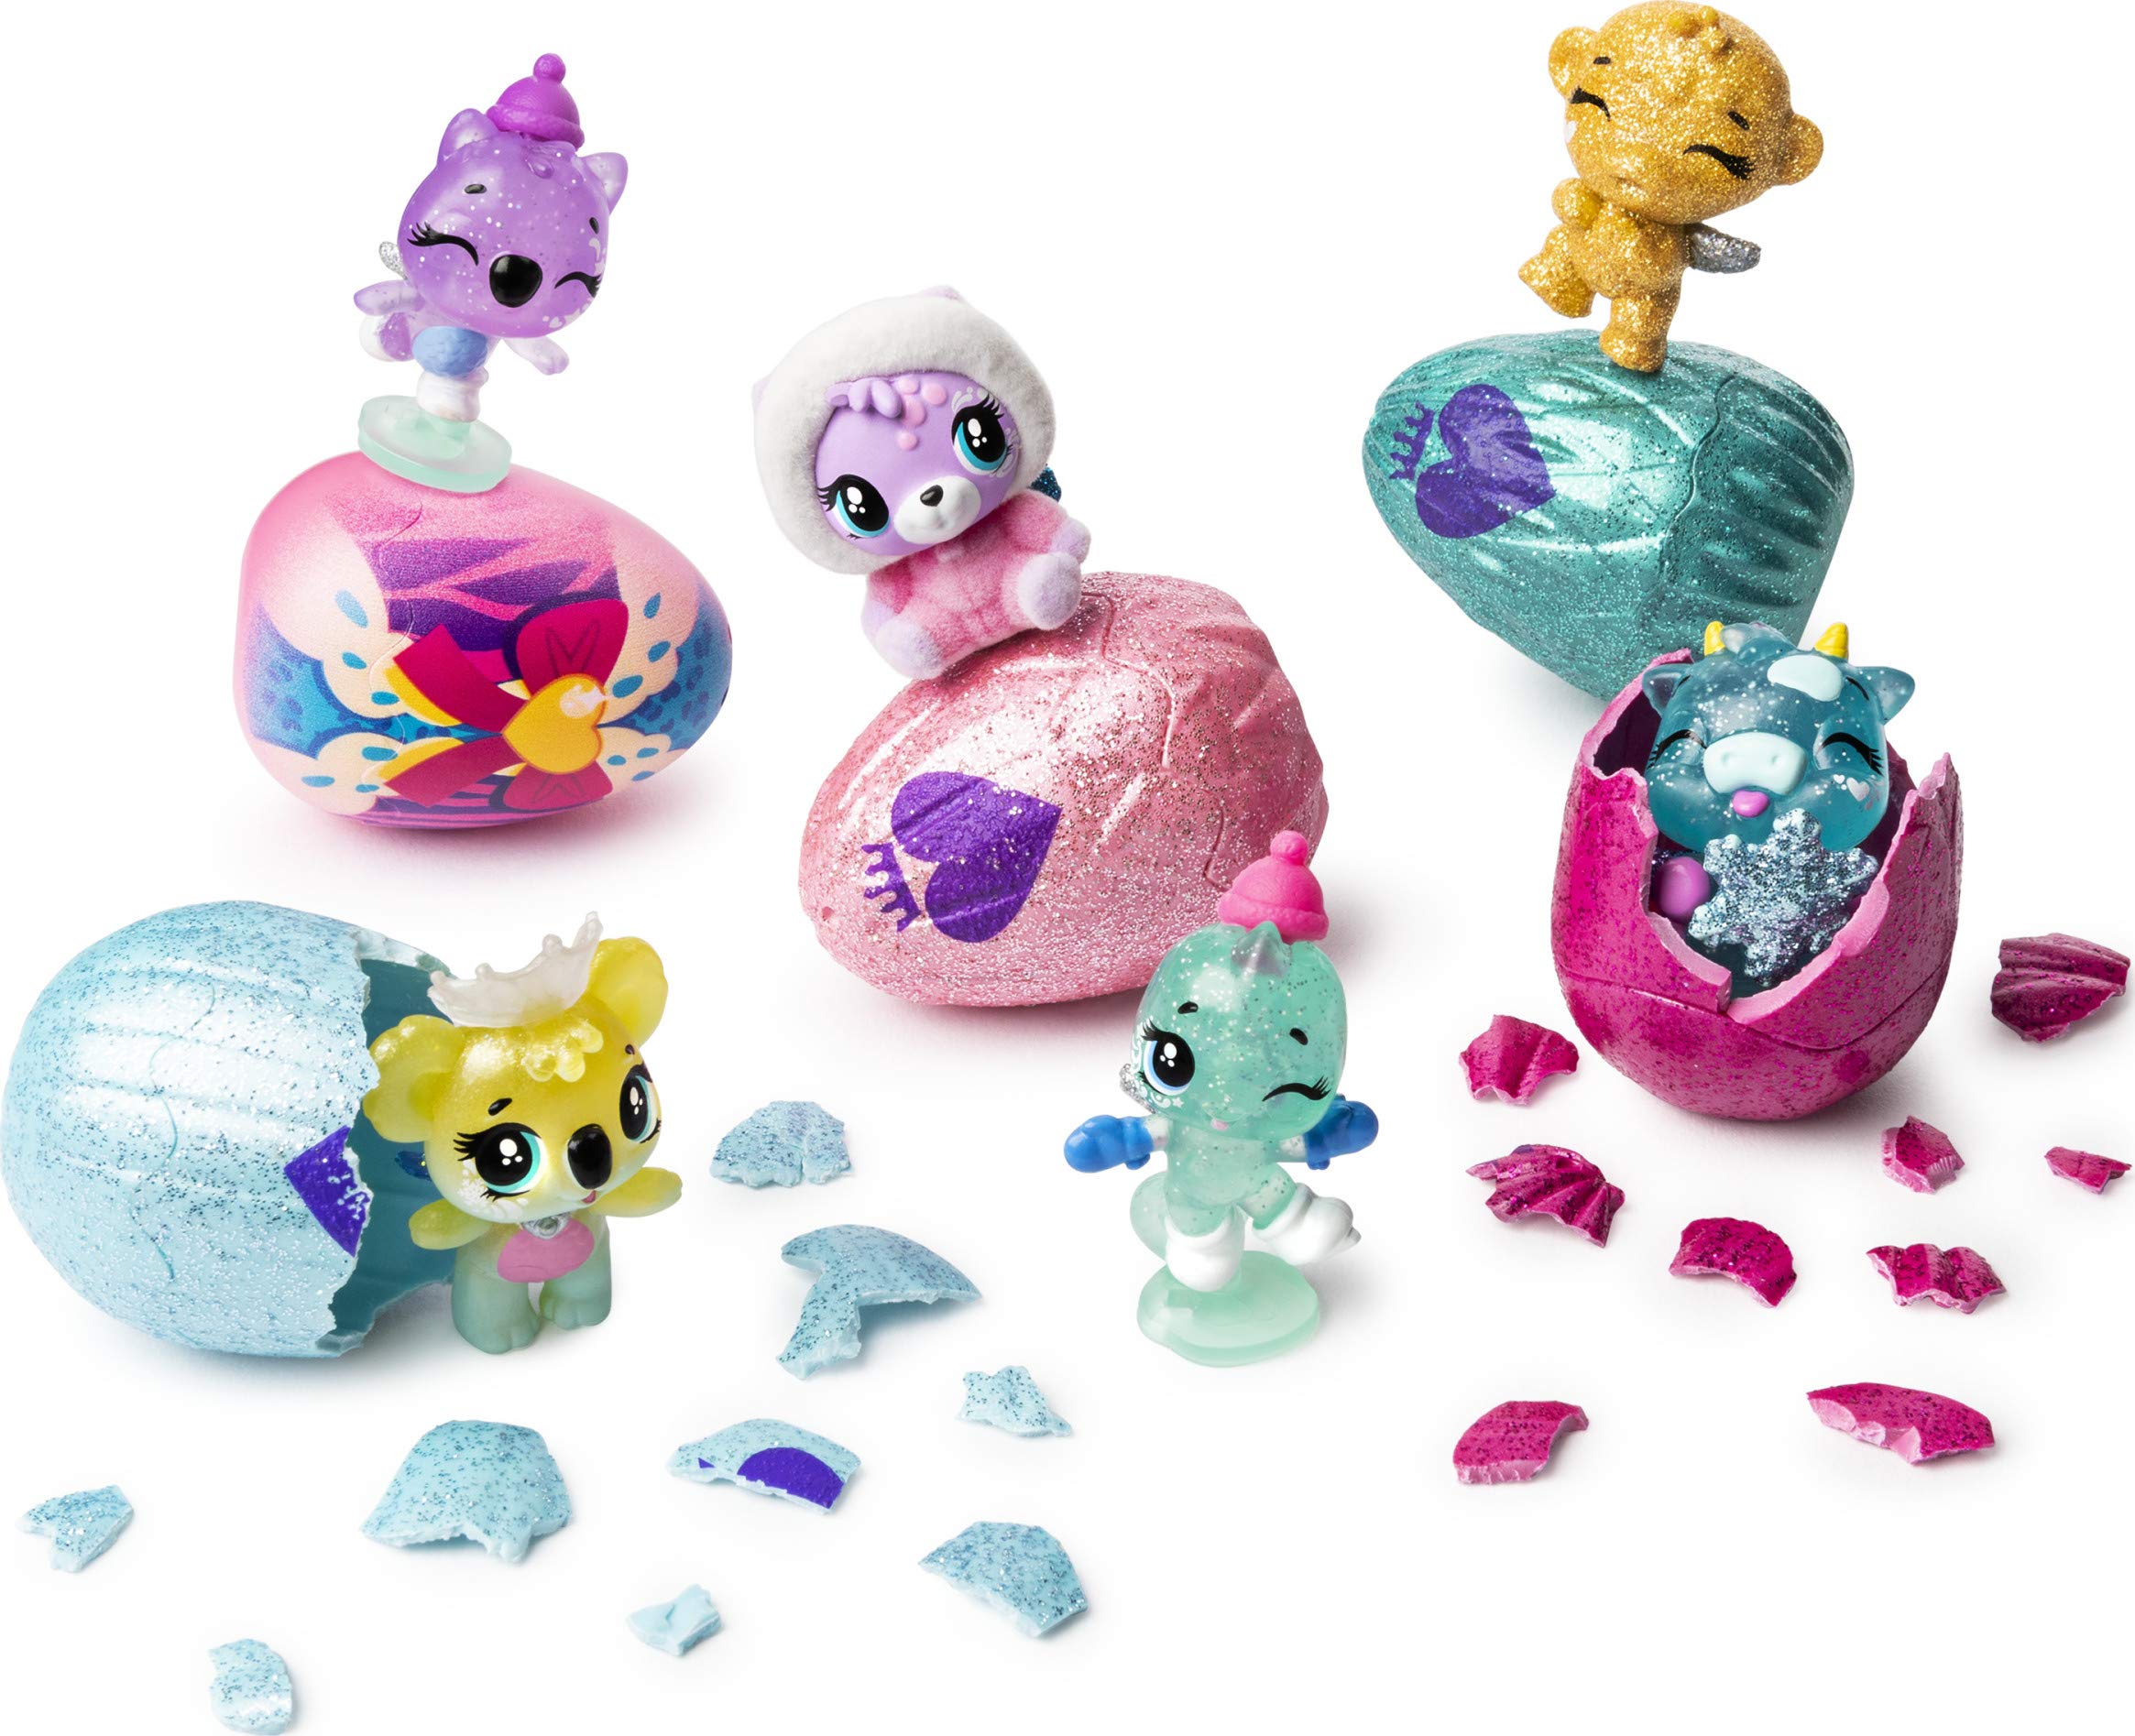 Hatchimals CollEGGtibles, Royal Multipack with 4 and Accessories, for Kids Aged 5 and up (Styles May Vary)